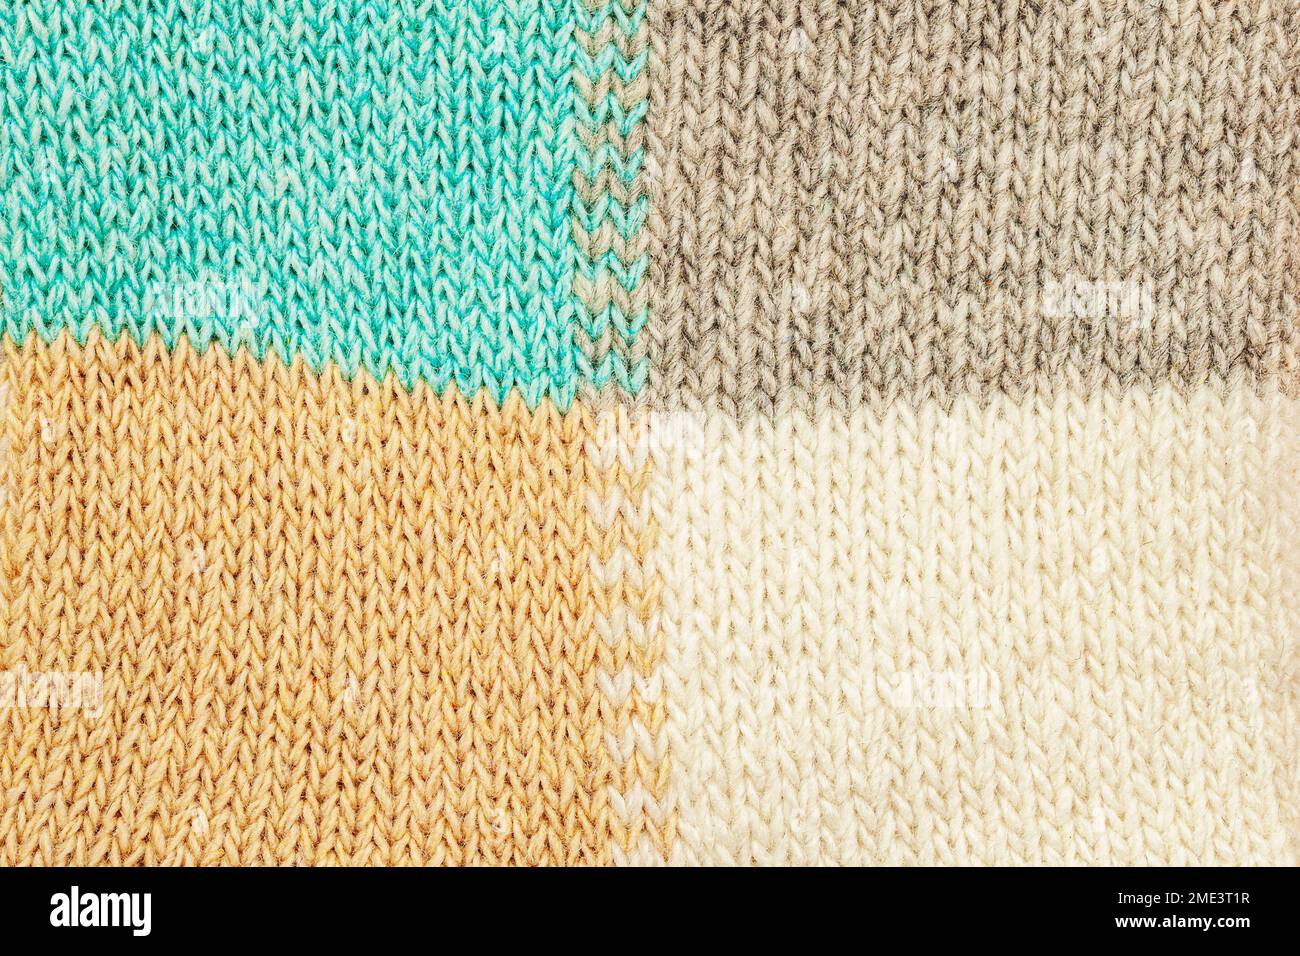 Knitted background, loops closeup. Hand knitting with woolen yarn. Woolen knitting pattern, warm sweater, copy space Stock Photo